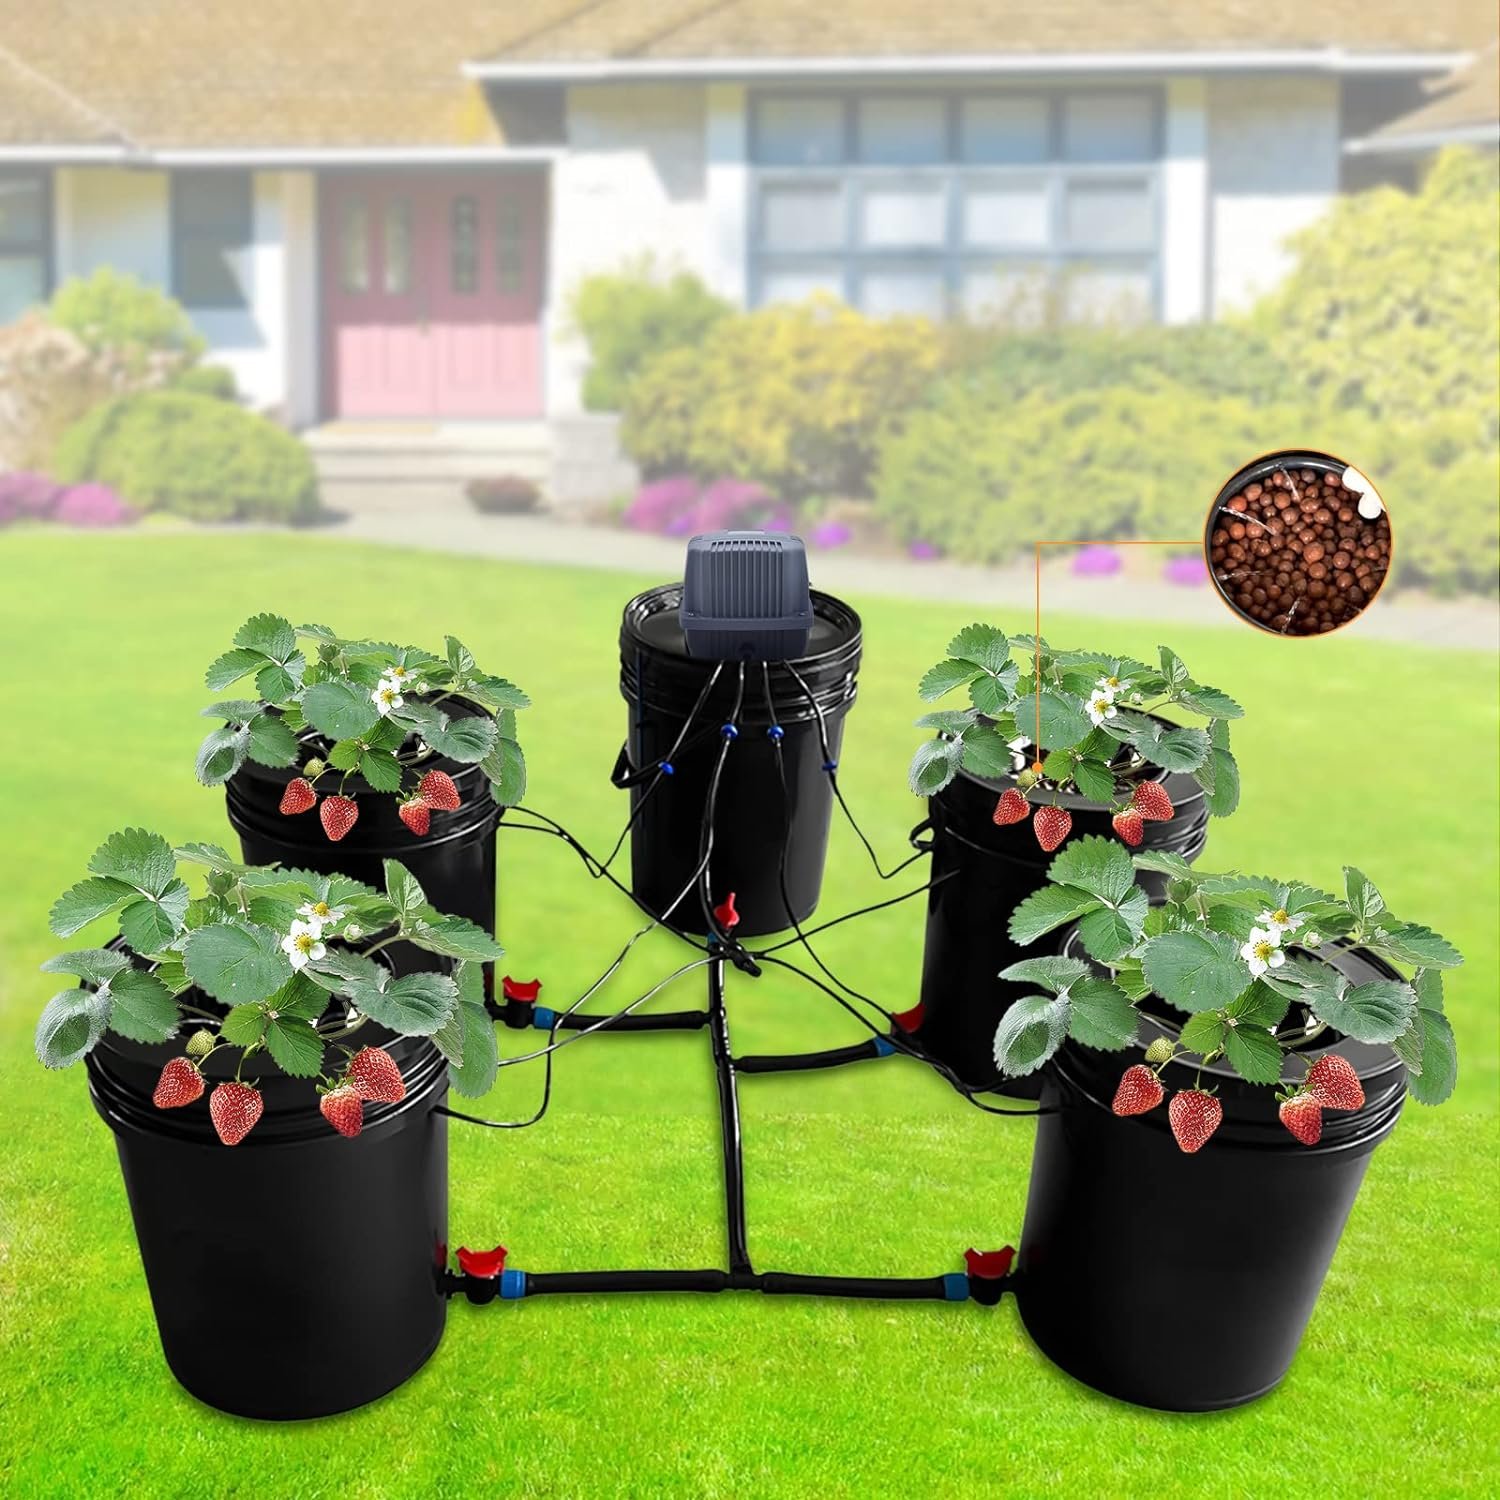 Hydroponics Growing System 5 Gallon 5 Buckets w/Reservoir Kit Deep Water Culture Growing Bucket Plant Multi Barrel Hydroponic Machine Drip Irrigation System for Indoor Outdoor Leafy Vegetables